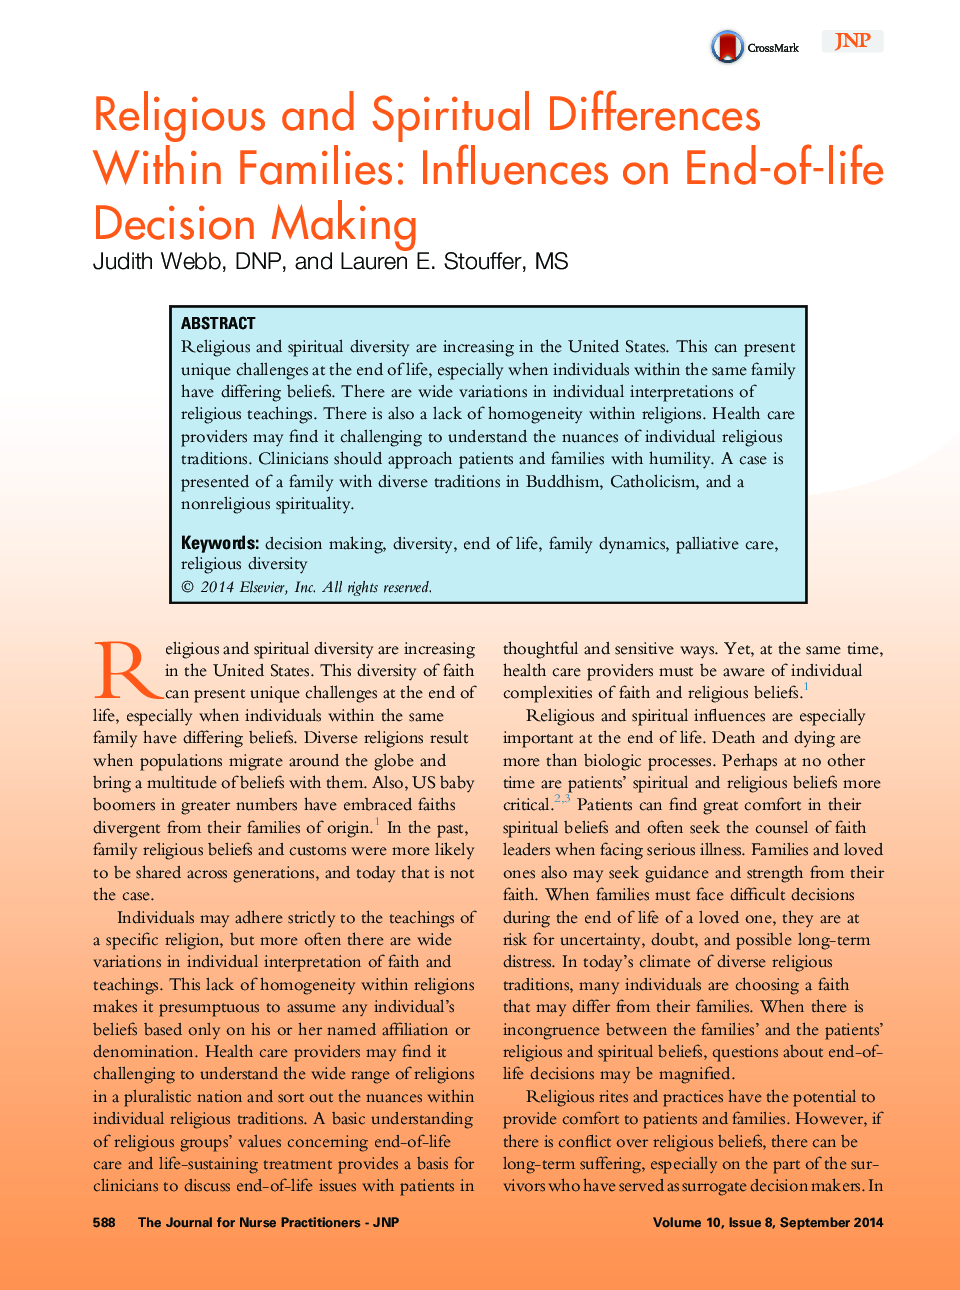 Religious and Spiritual Differences Within Families: Influences on End-of-life Decision Making 